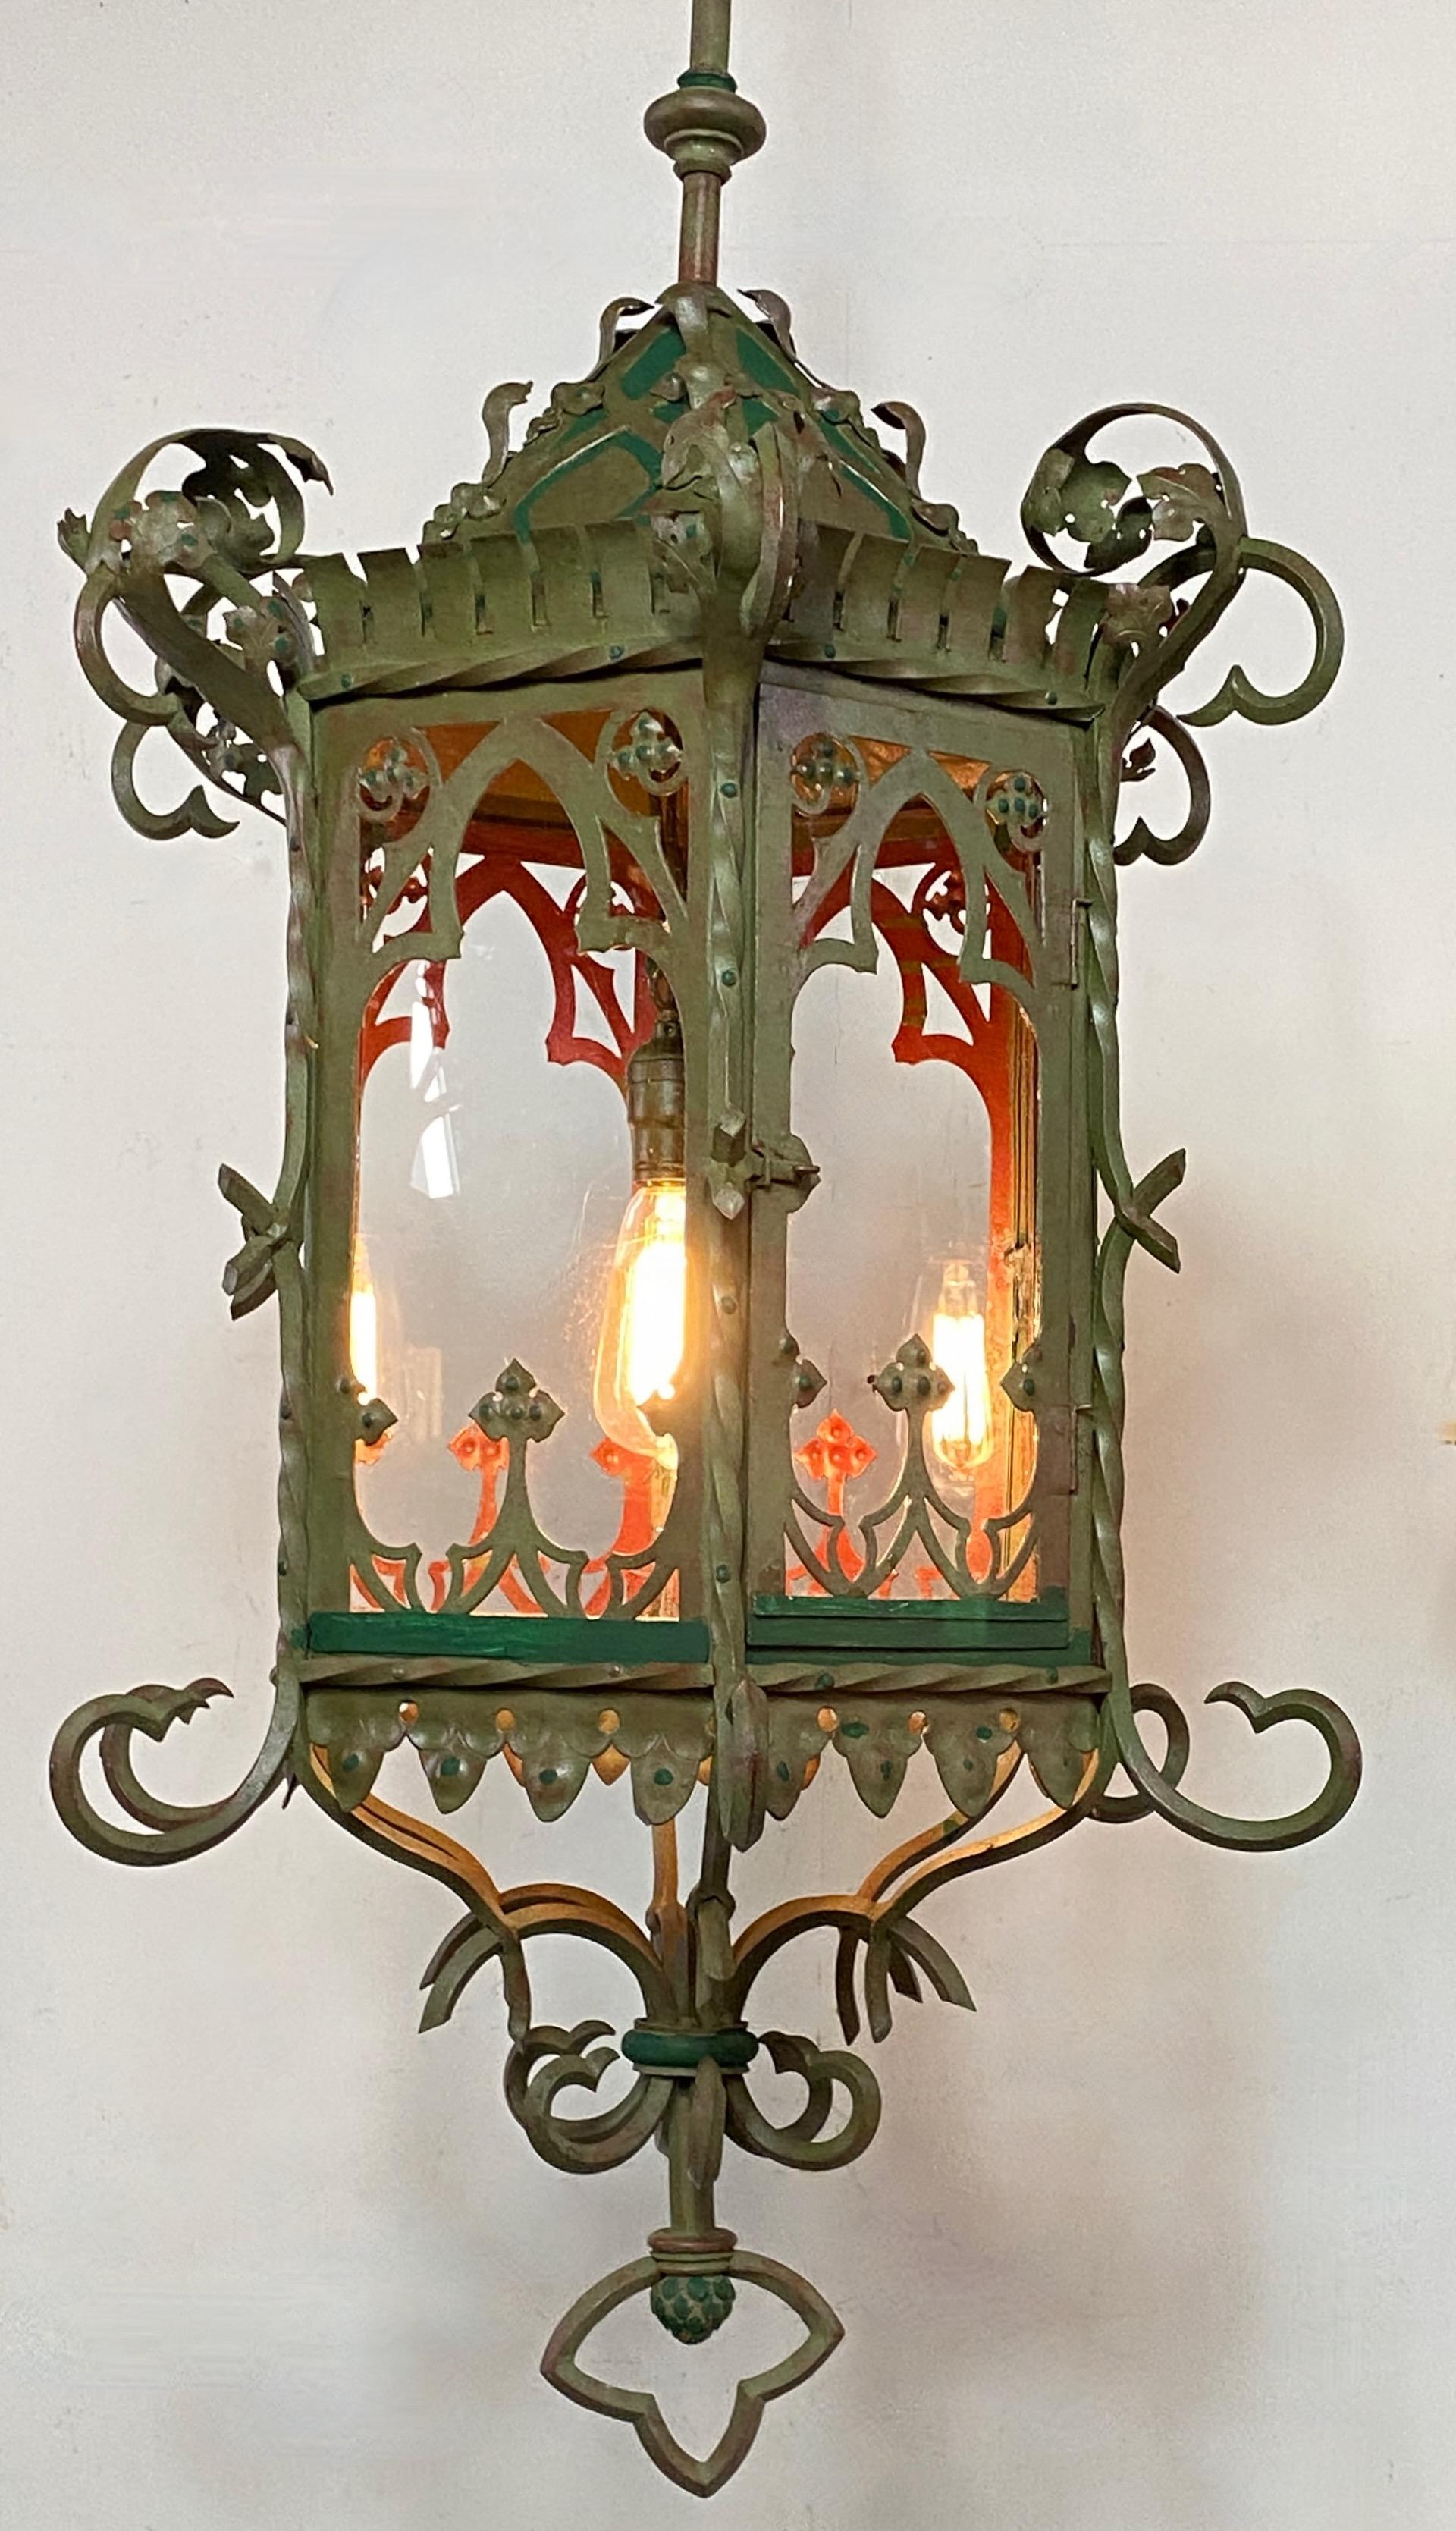 Highly unusual and excellent quality Asian inspired antique lantern. Wrought iron and steel with old green paint and glass panels. There is a hinged door that opens to replace light bulb.
Possibly this originally was a gas lantern.
Recently re-wired